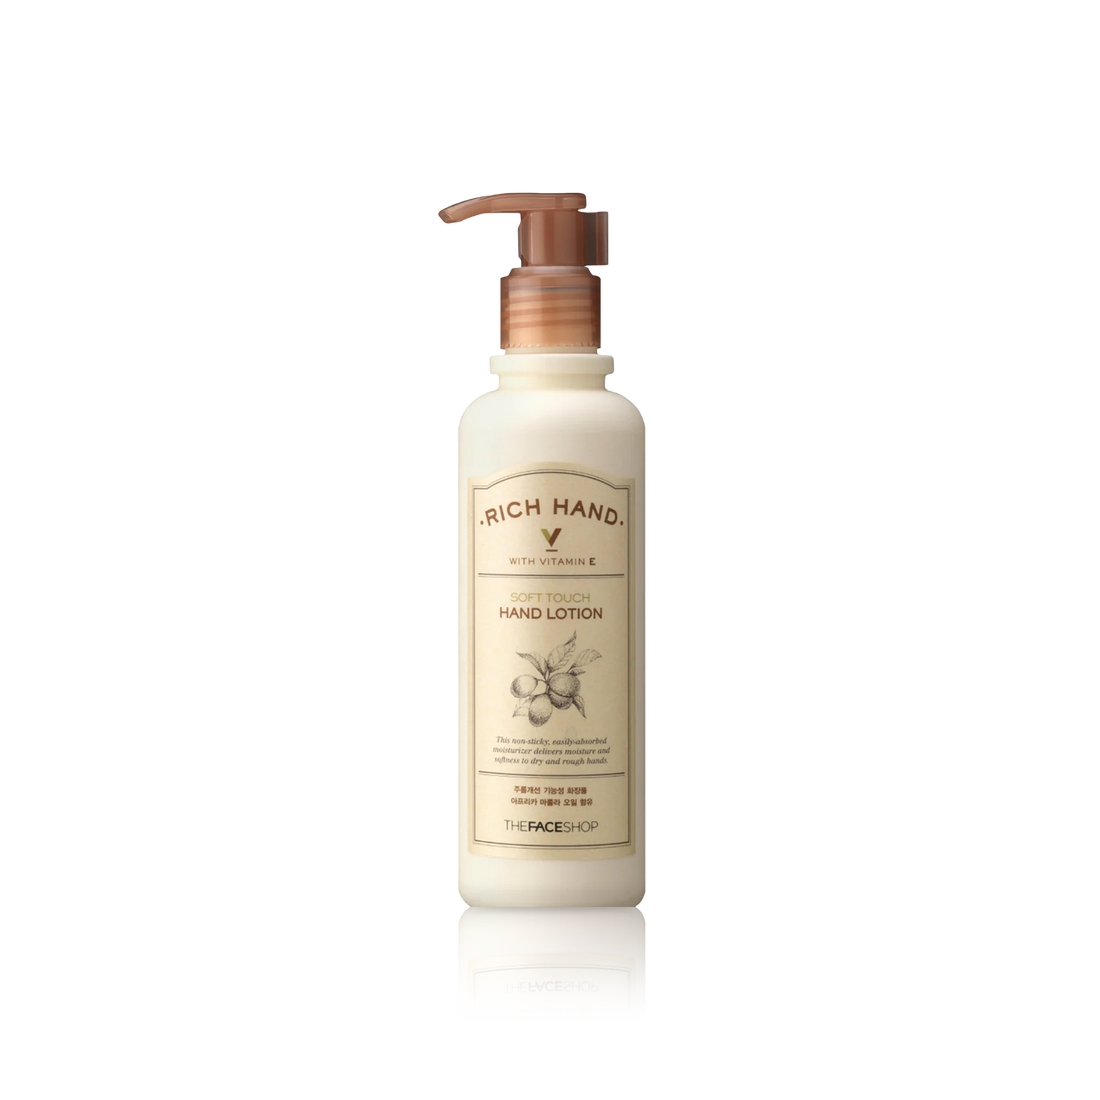 Rich Hand V Soft Touch Hand Lotion